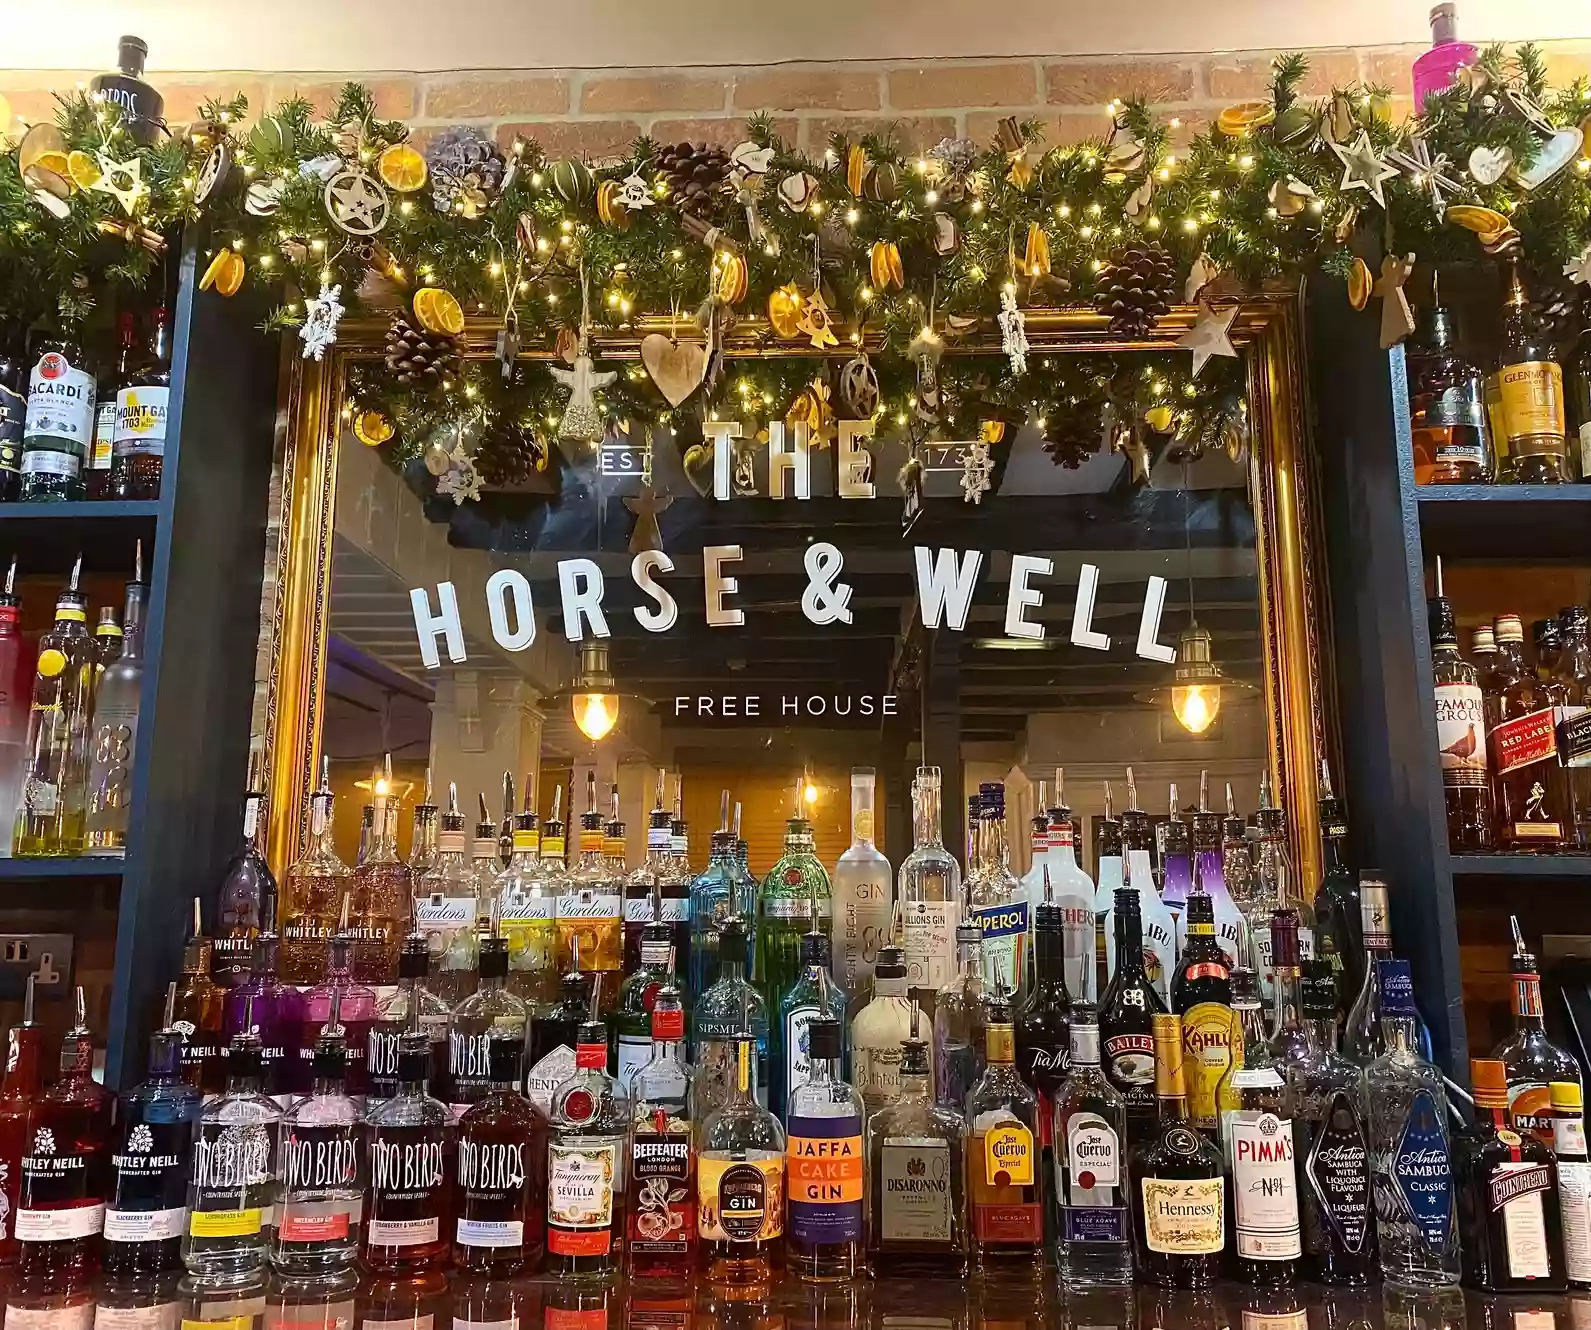 The Horse & Well